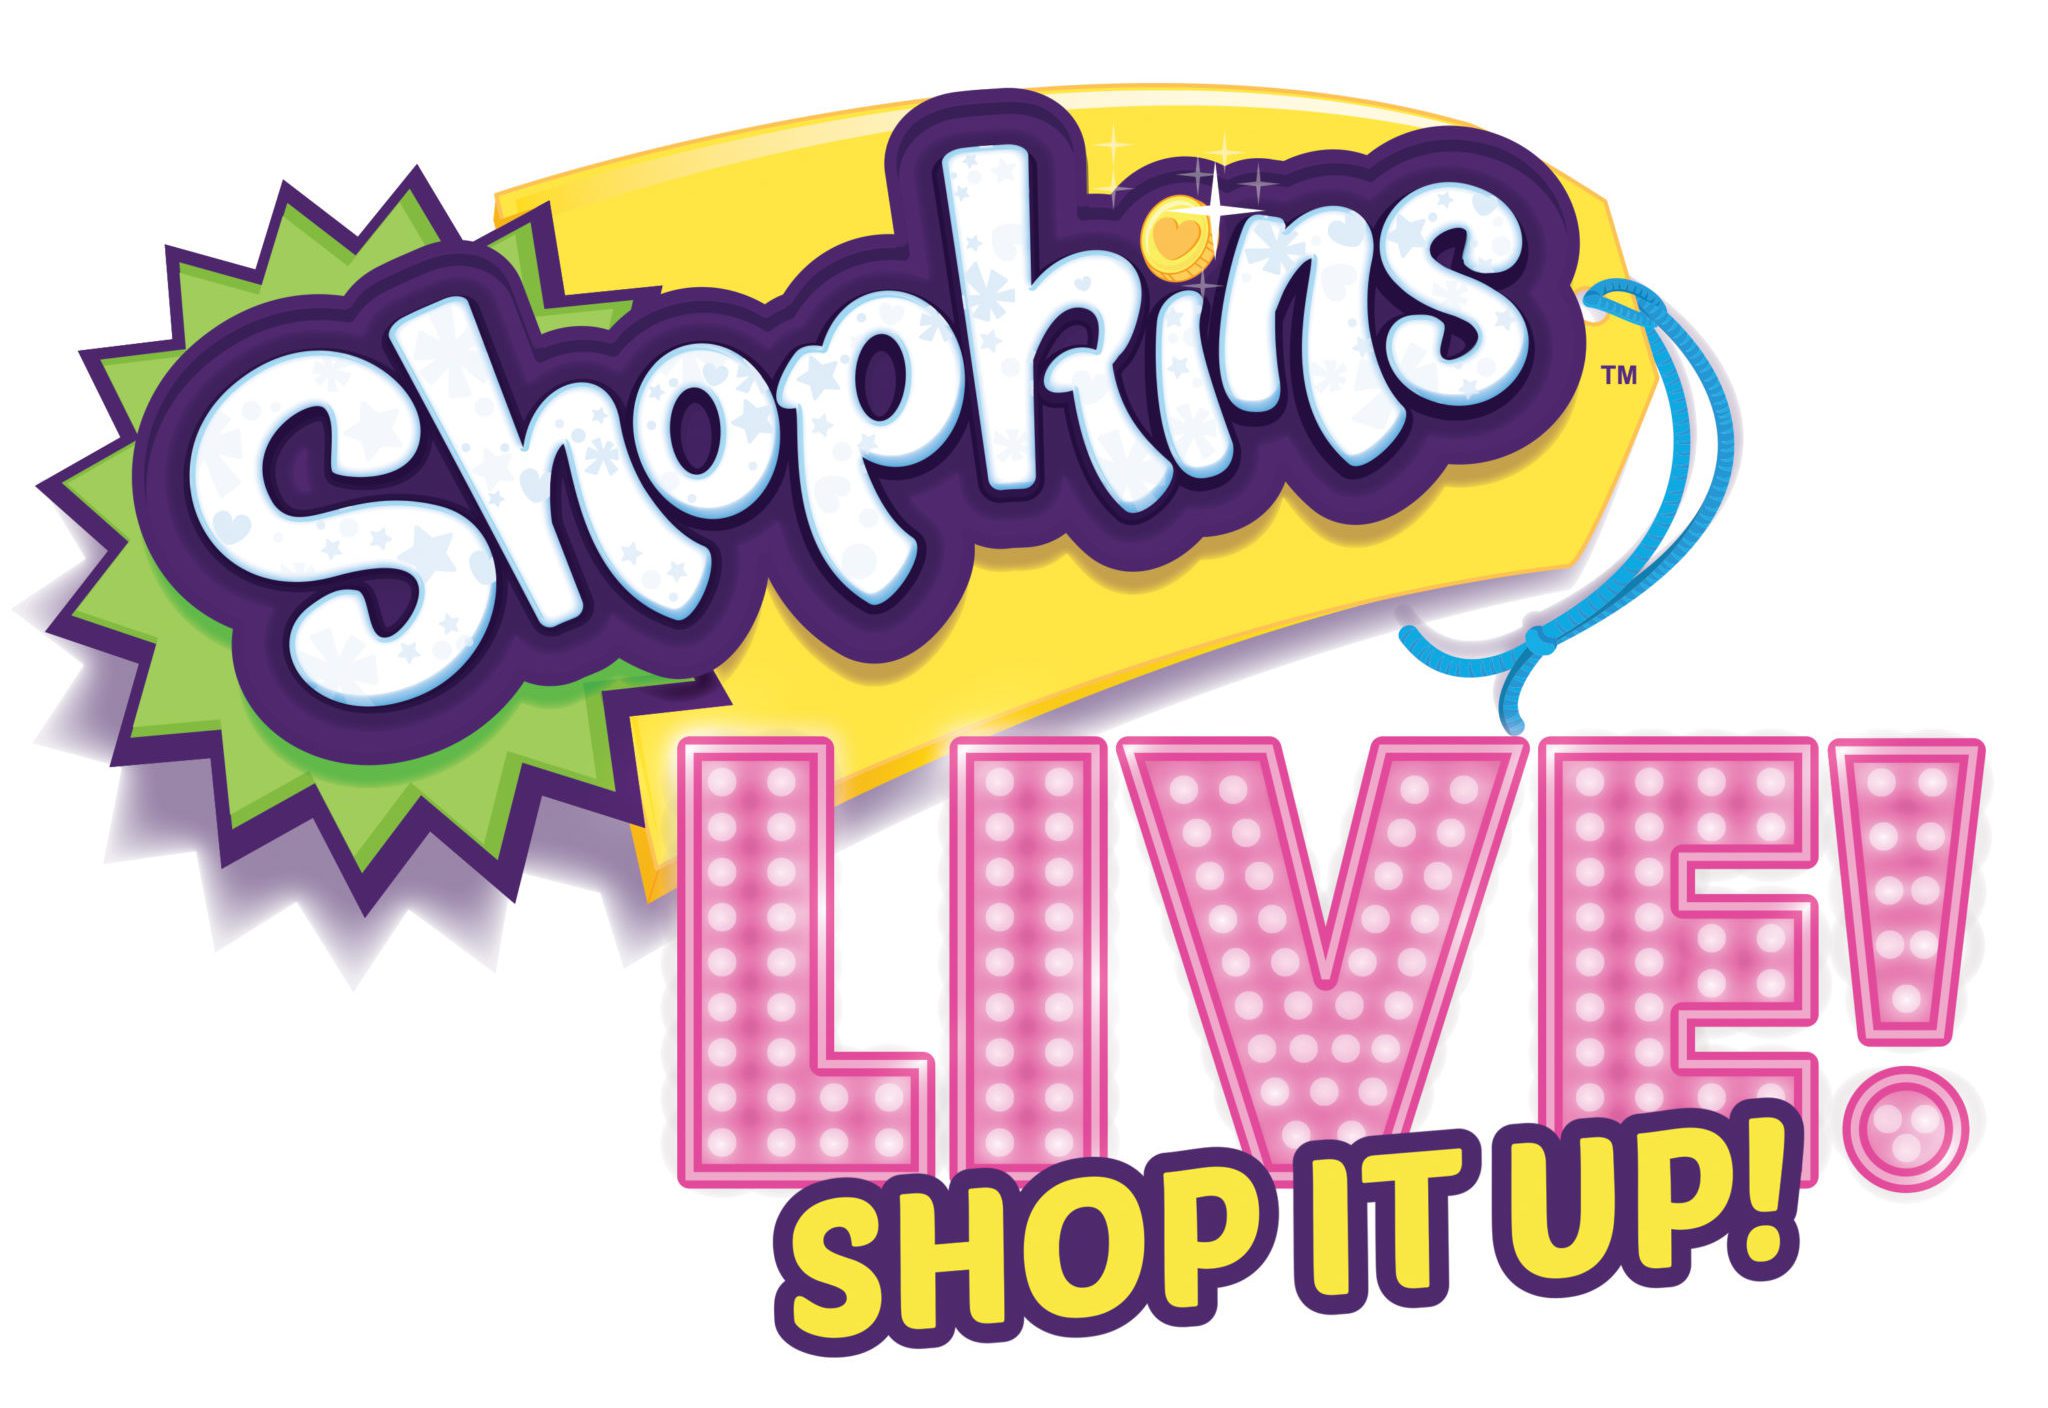 Win Tickets to See Shopkins Live!